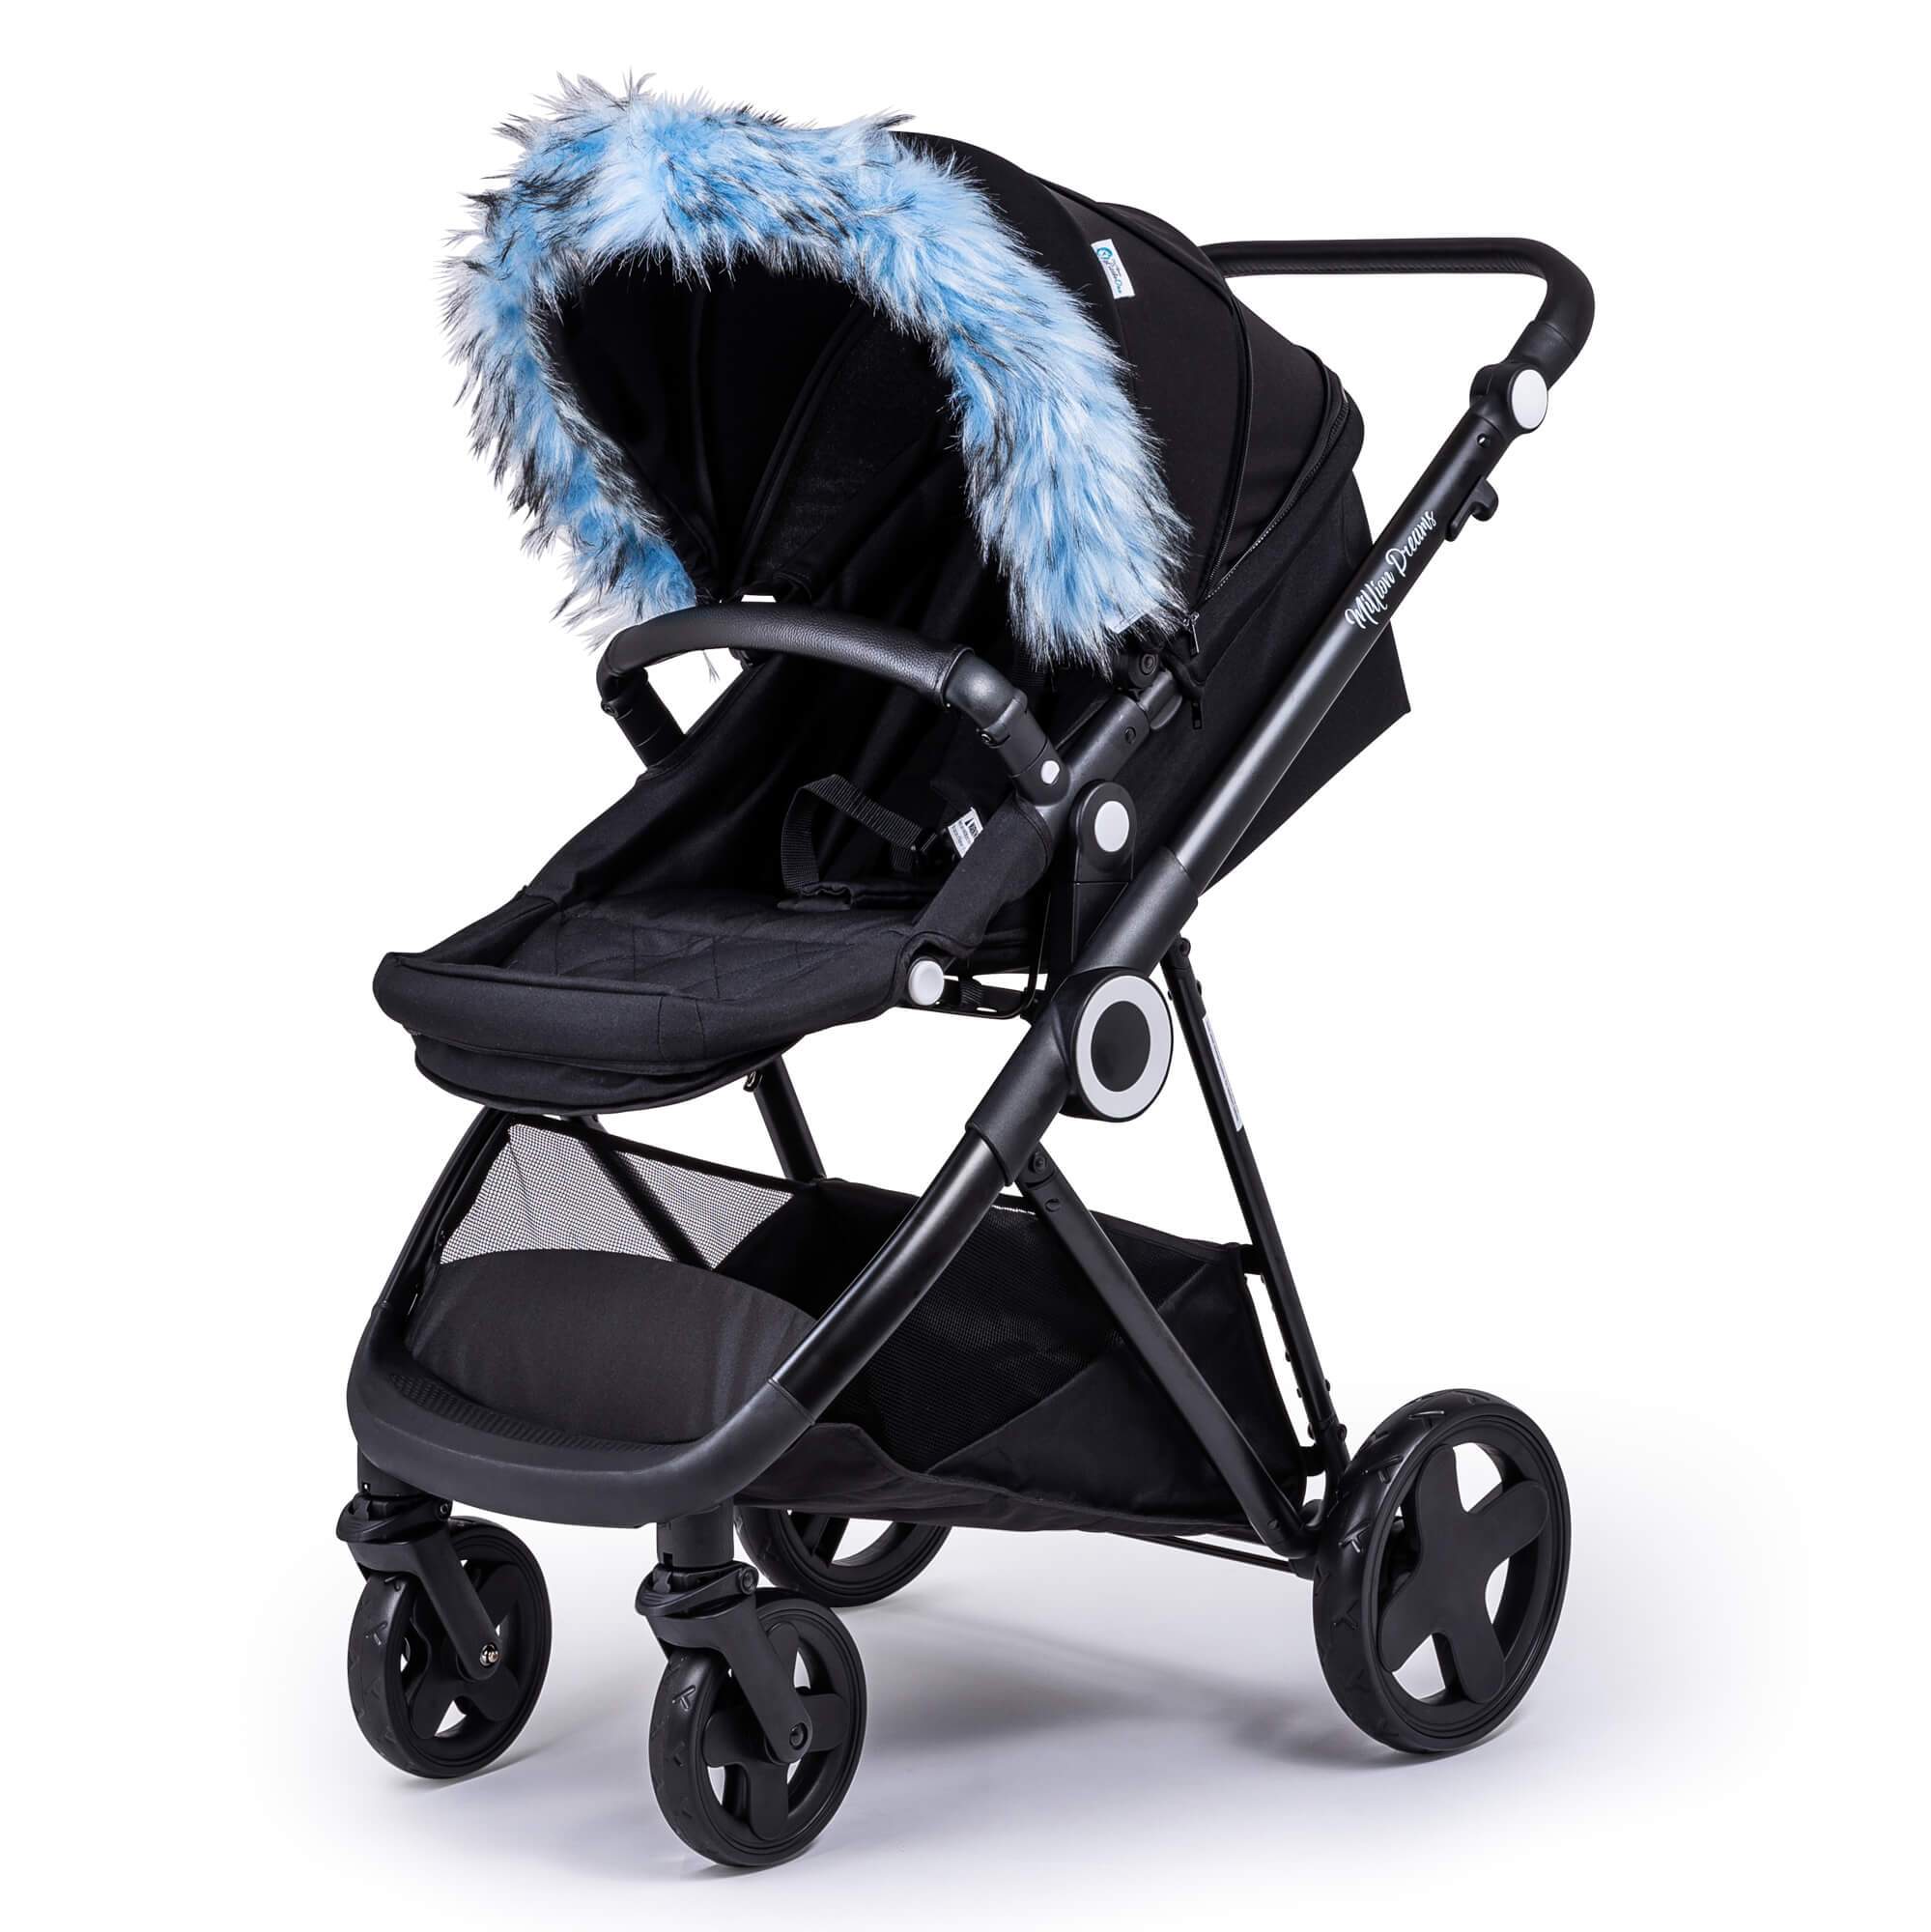 Pram Fur Hood Trim Attachment for Pushchair Compatible with Esprit - Light Blue / Fits All Models | For Your Little One